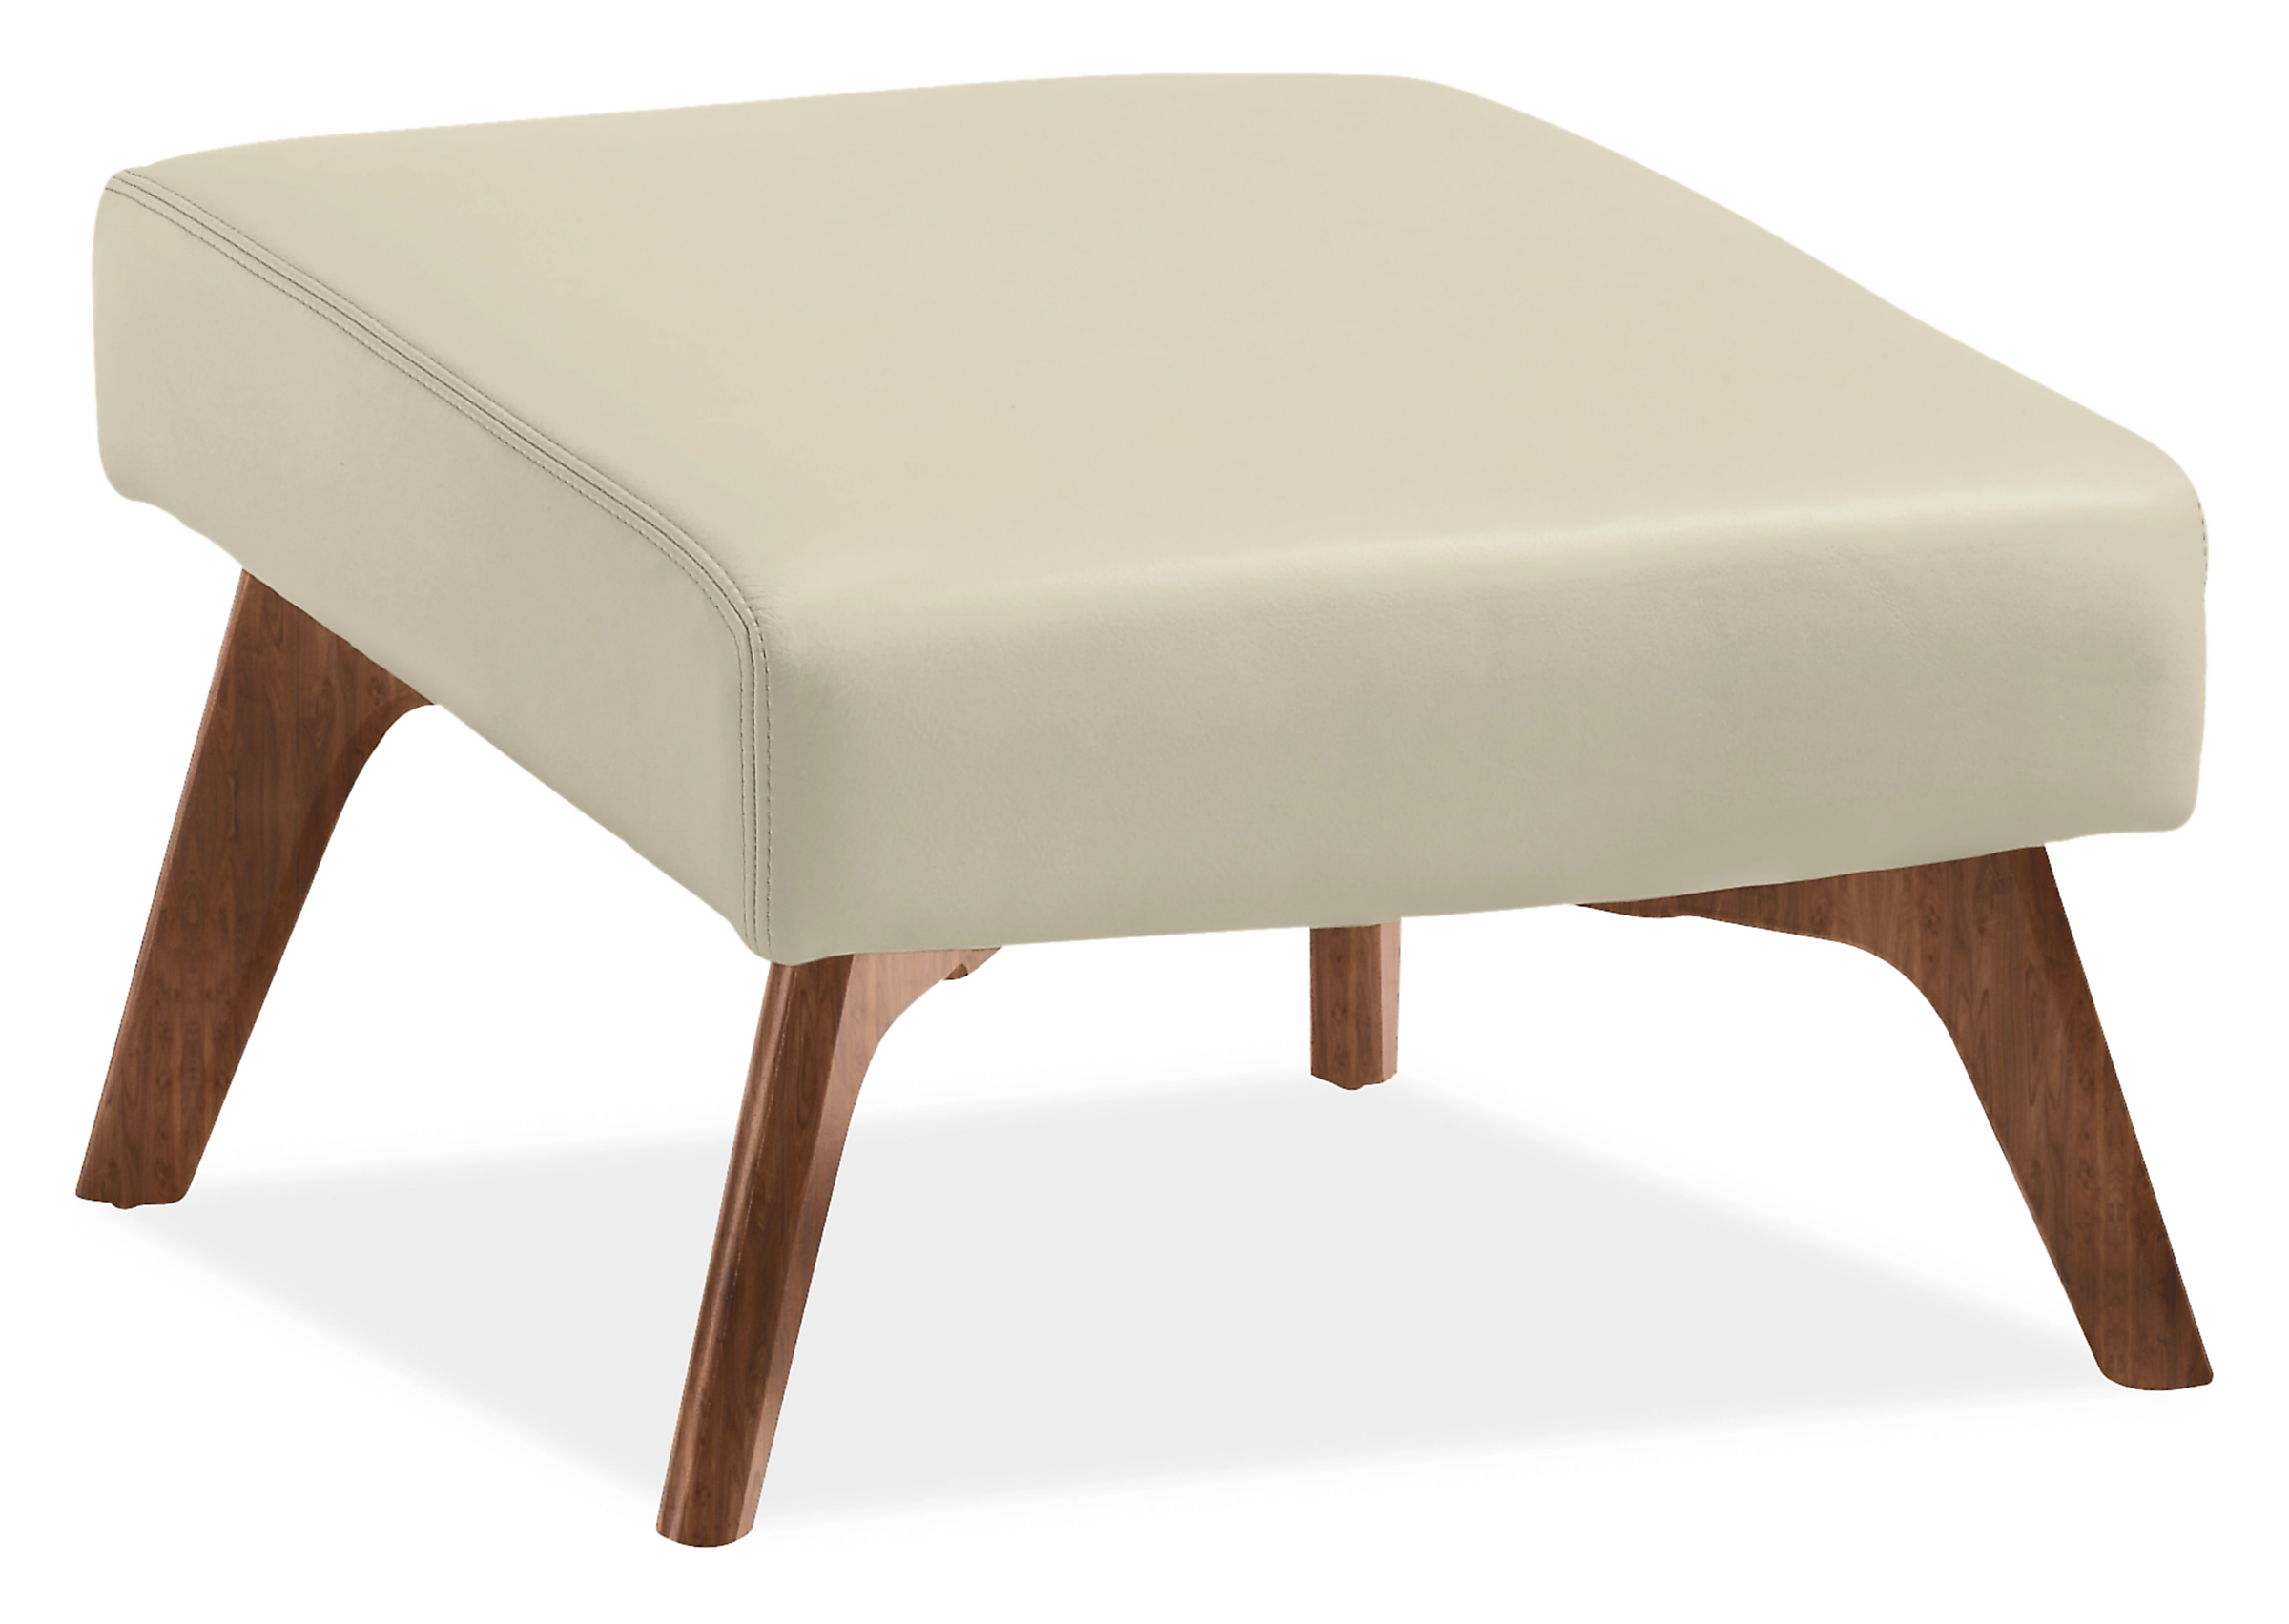 Boden 22w 22d 17h Ottoman in Urbino Ivory Leather with Walnut Base